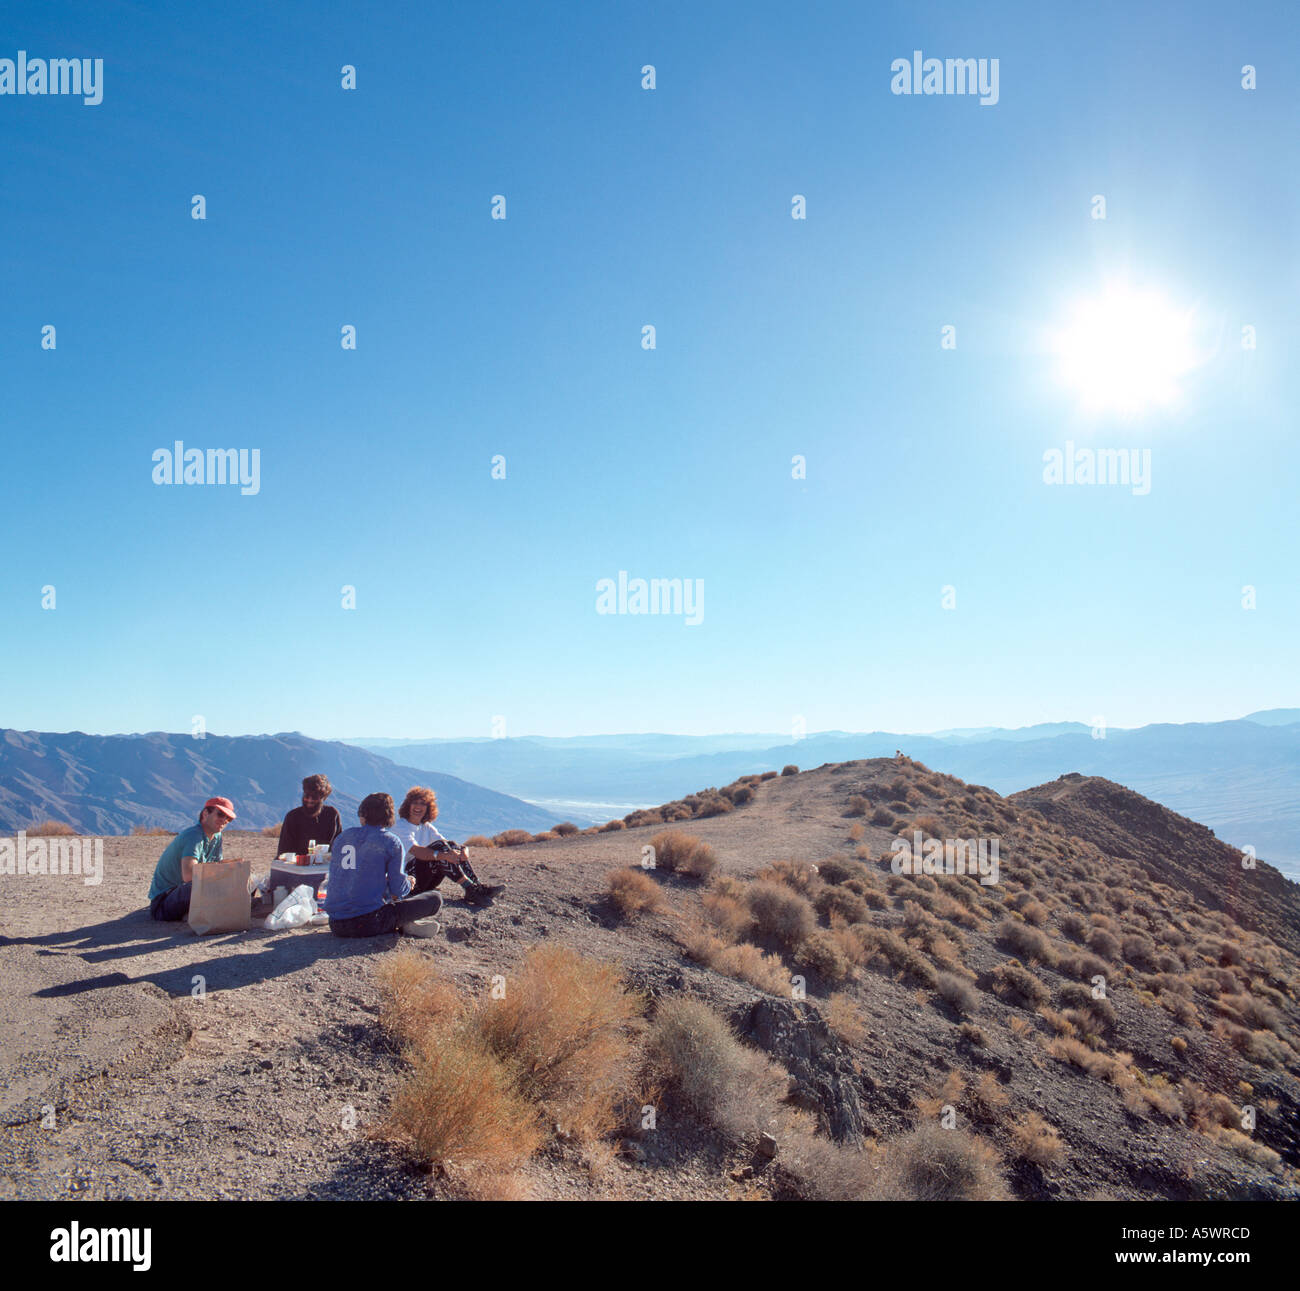 Picnic on the hills above Death Valley, California, USA Stock Photo